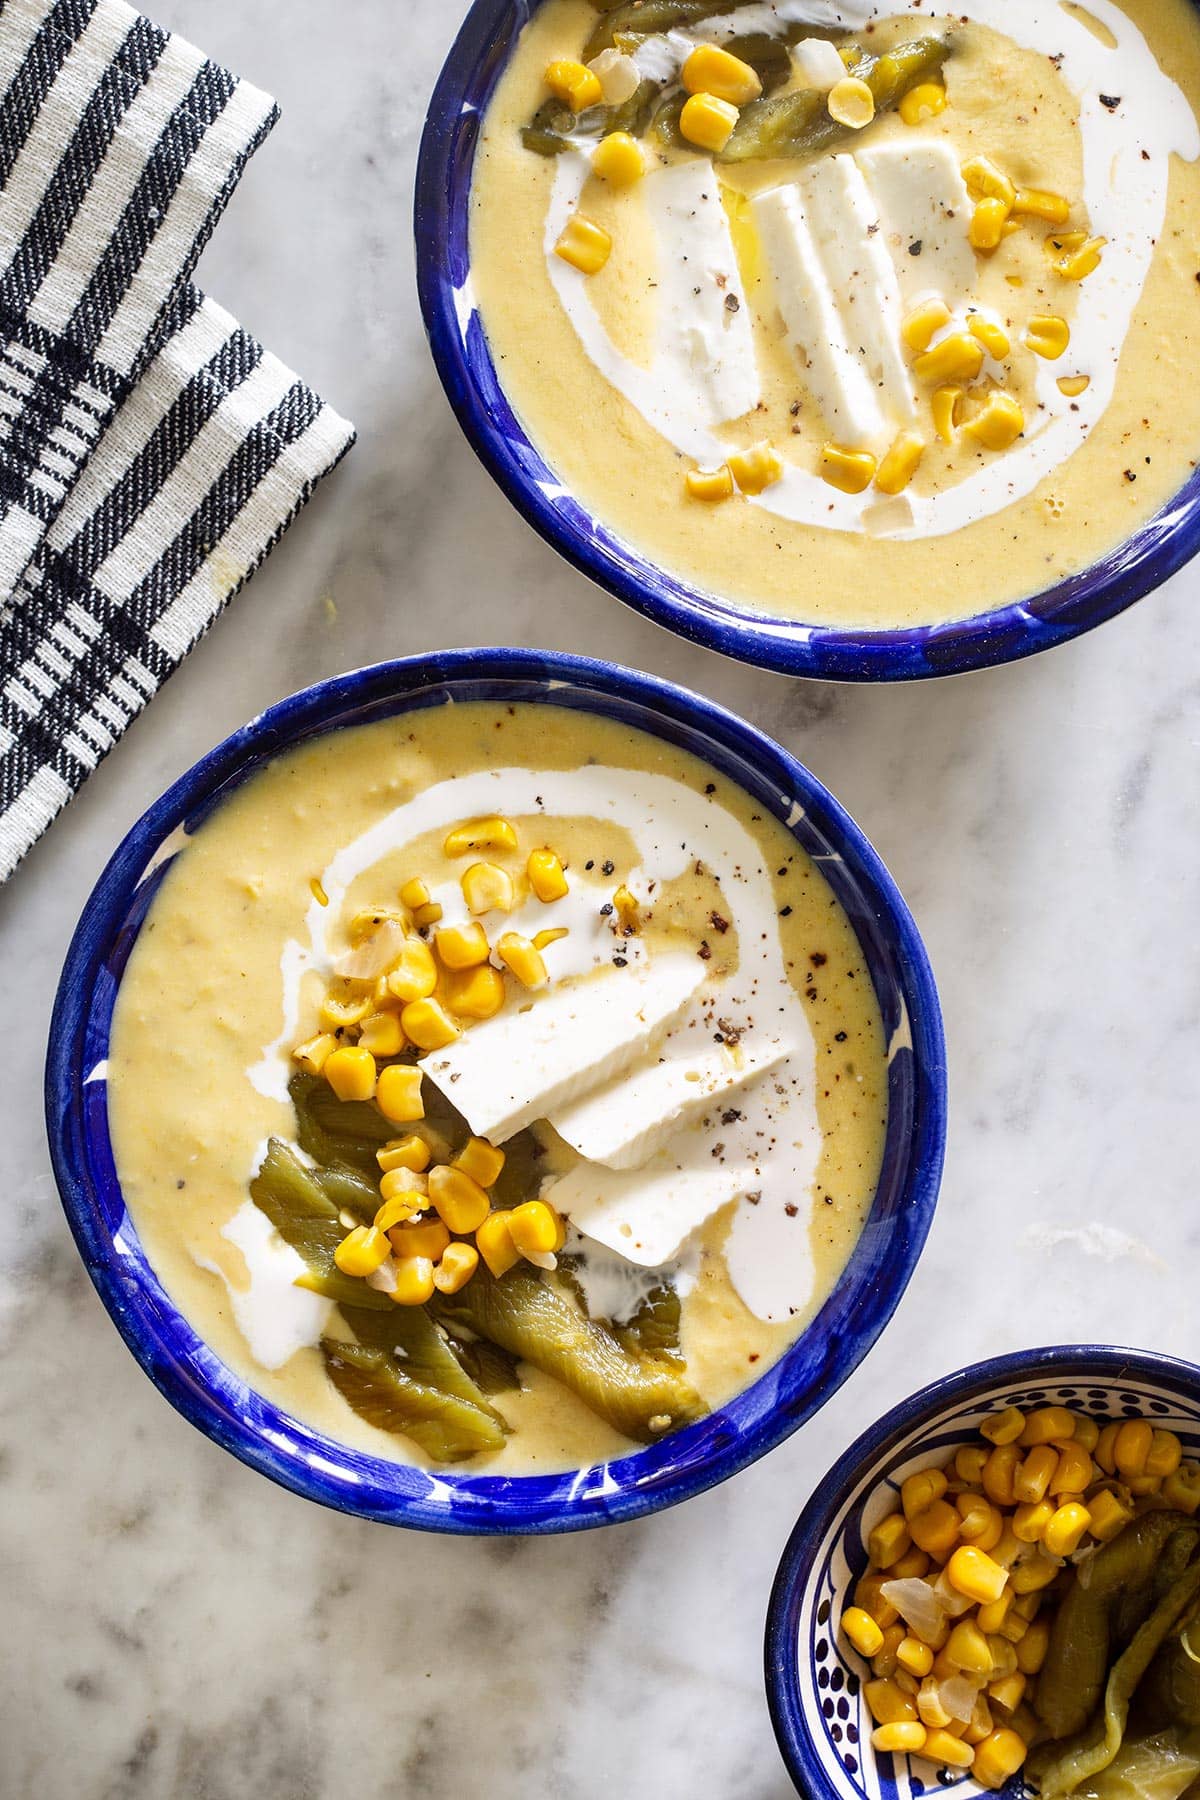 Crema de elote served in Mexican clay bowls and garnished with corn, roasted poblano peppers, cheese, and crema.